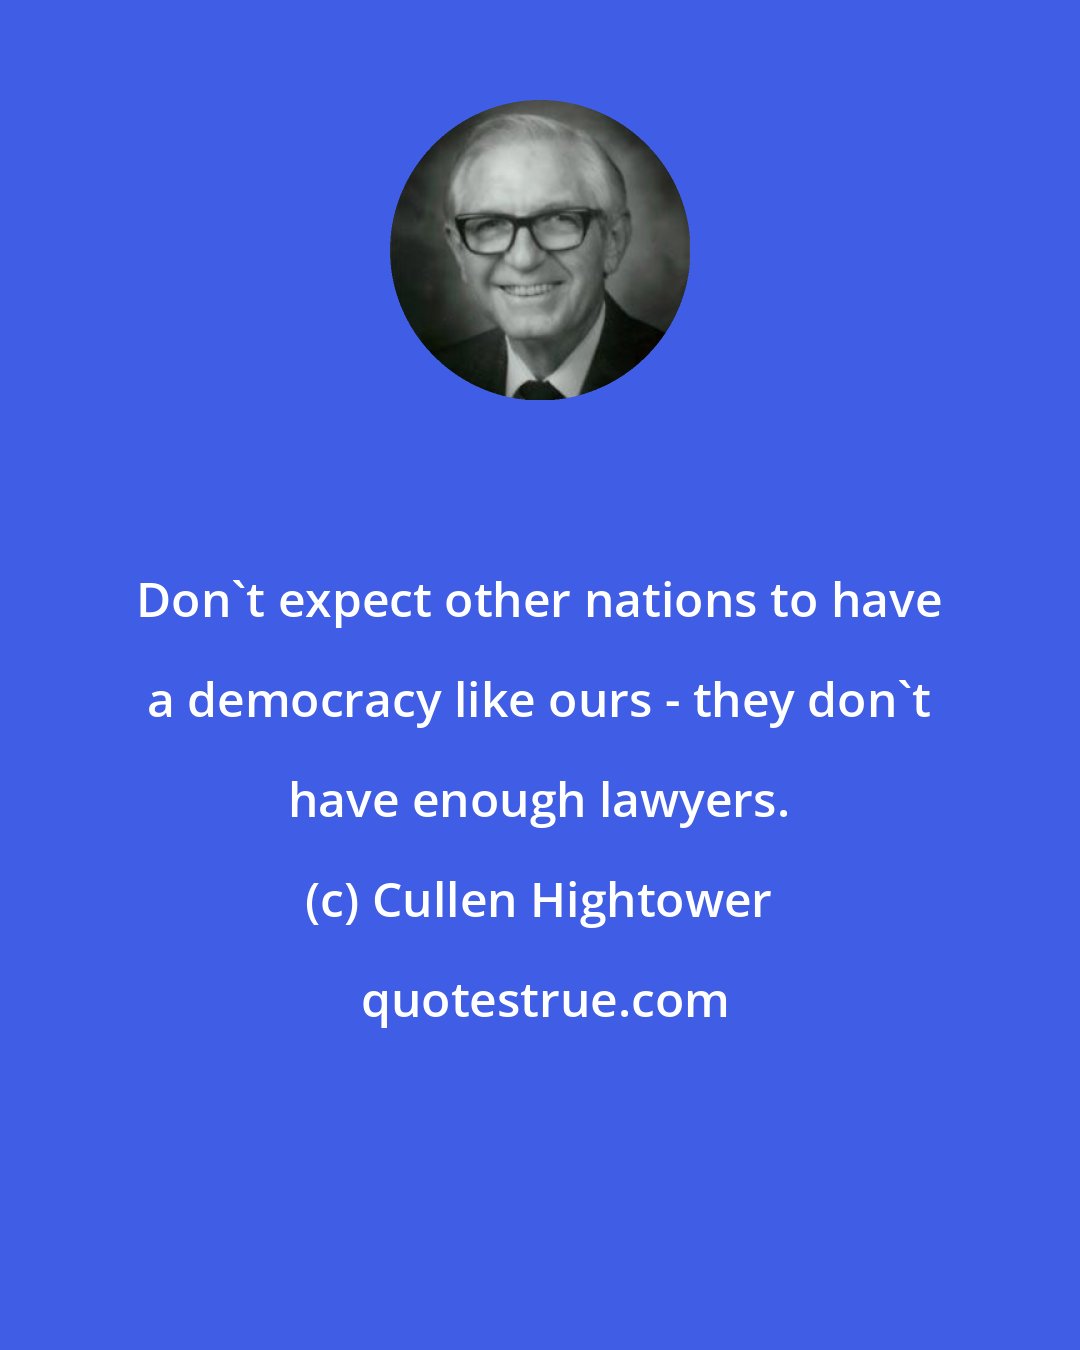 Cullen Hightower: Don't expect other nations to have a democracy like ours - they don't have enough lawyers.